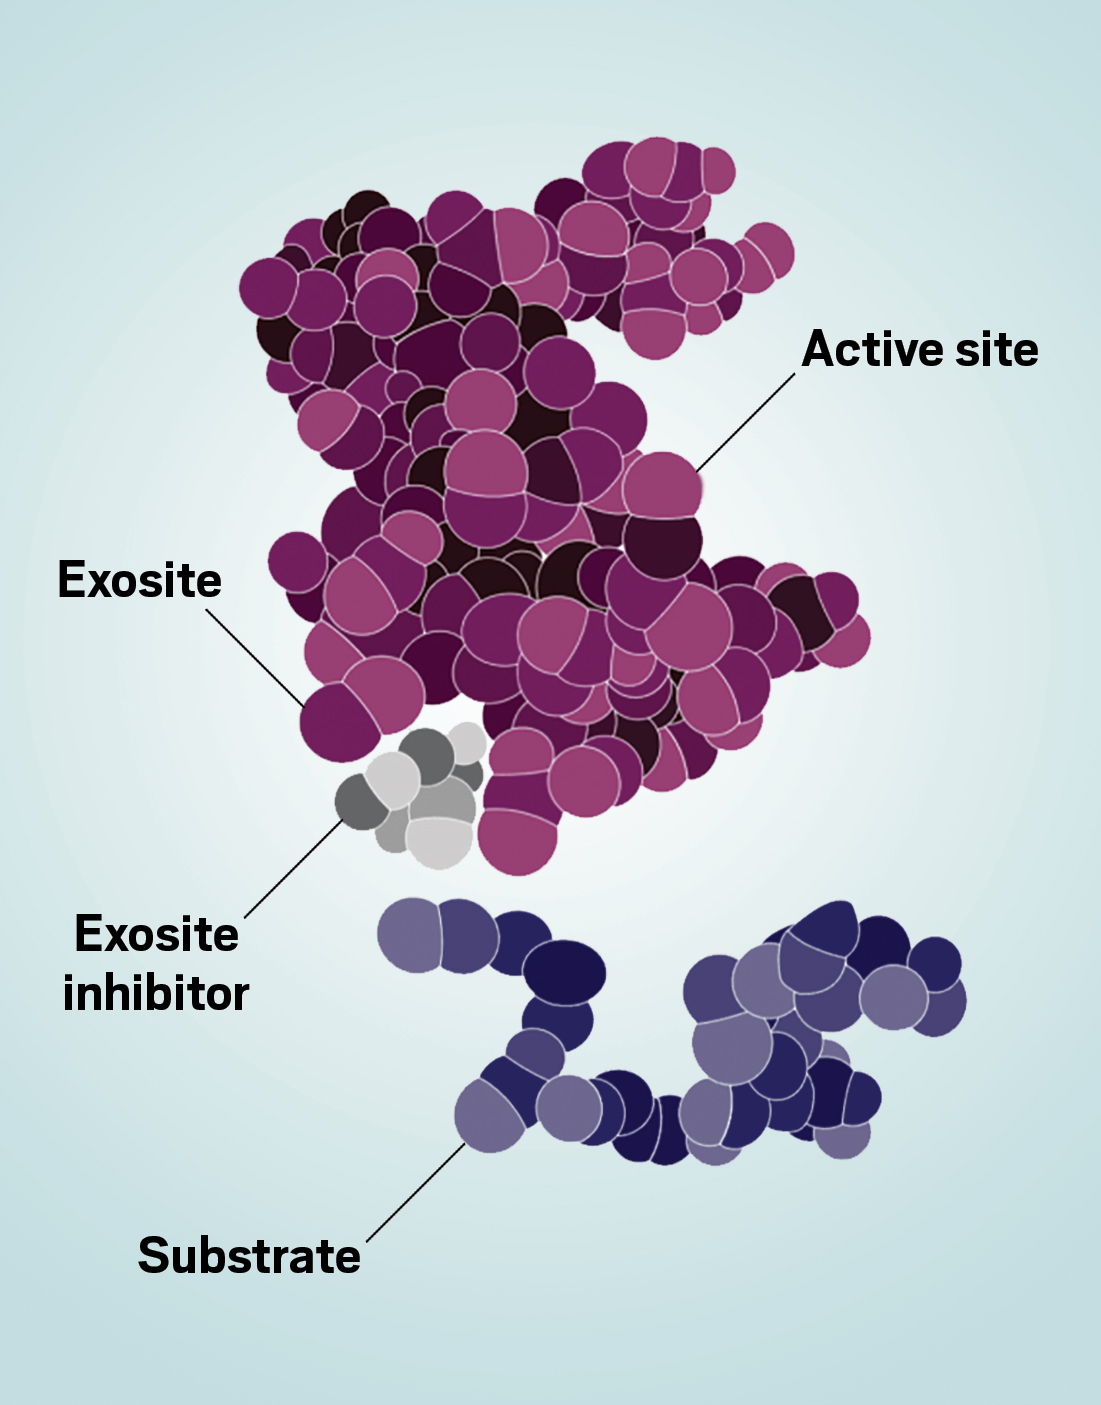 Substrates bind to enzymes at active sites, but they may also bind to secondary spots called exosites. By identifying small-molecule drugs that prevent a substrate from binding an enzyme by blocking exosites, Exo Therapeutics hopes to develop more-targeted drugs with fewer side effects.